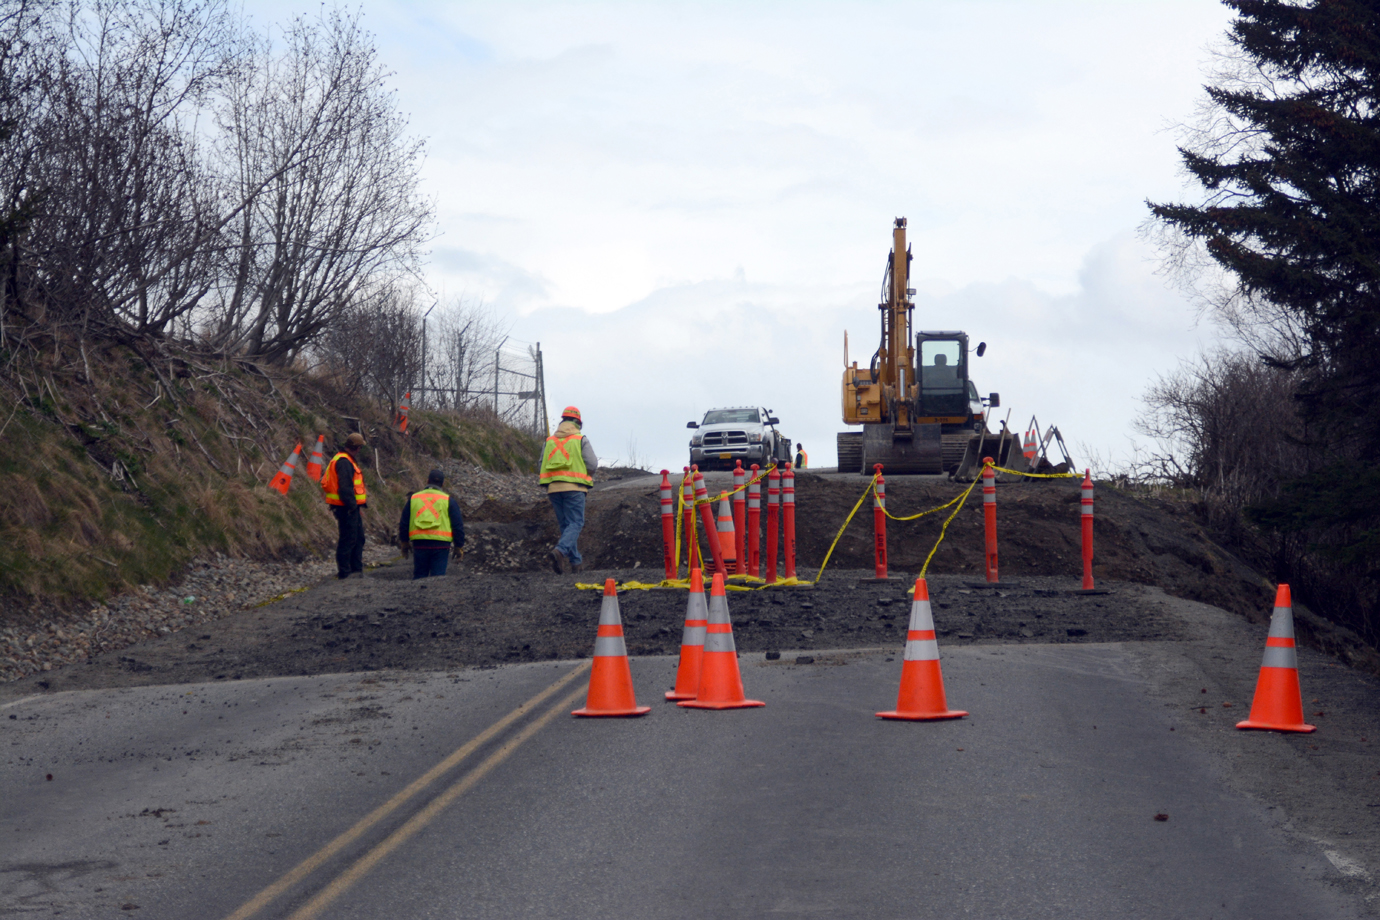 Alaska Department of Transportation and Public Facilities workers inspect repairs on the collapsed section of Kachemak Drive on Tuesday.-Photo by Michael Armstrong, Homer News